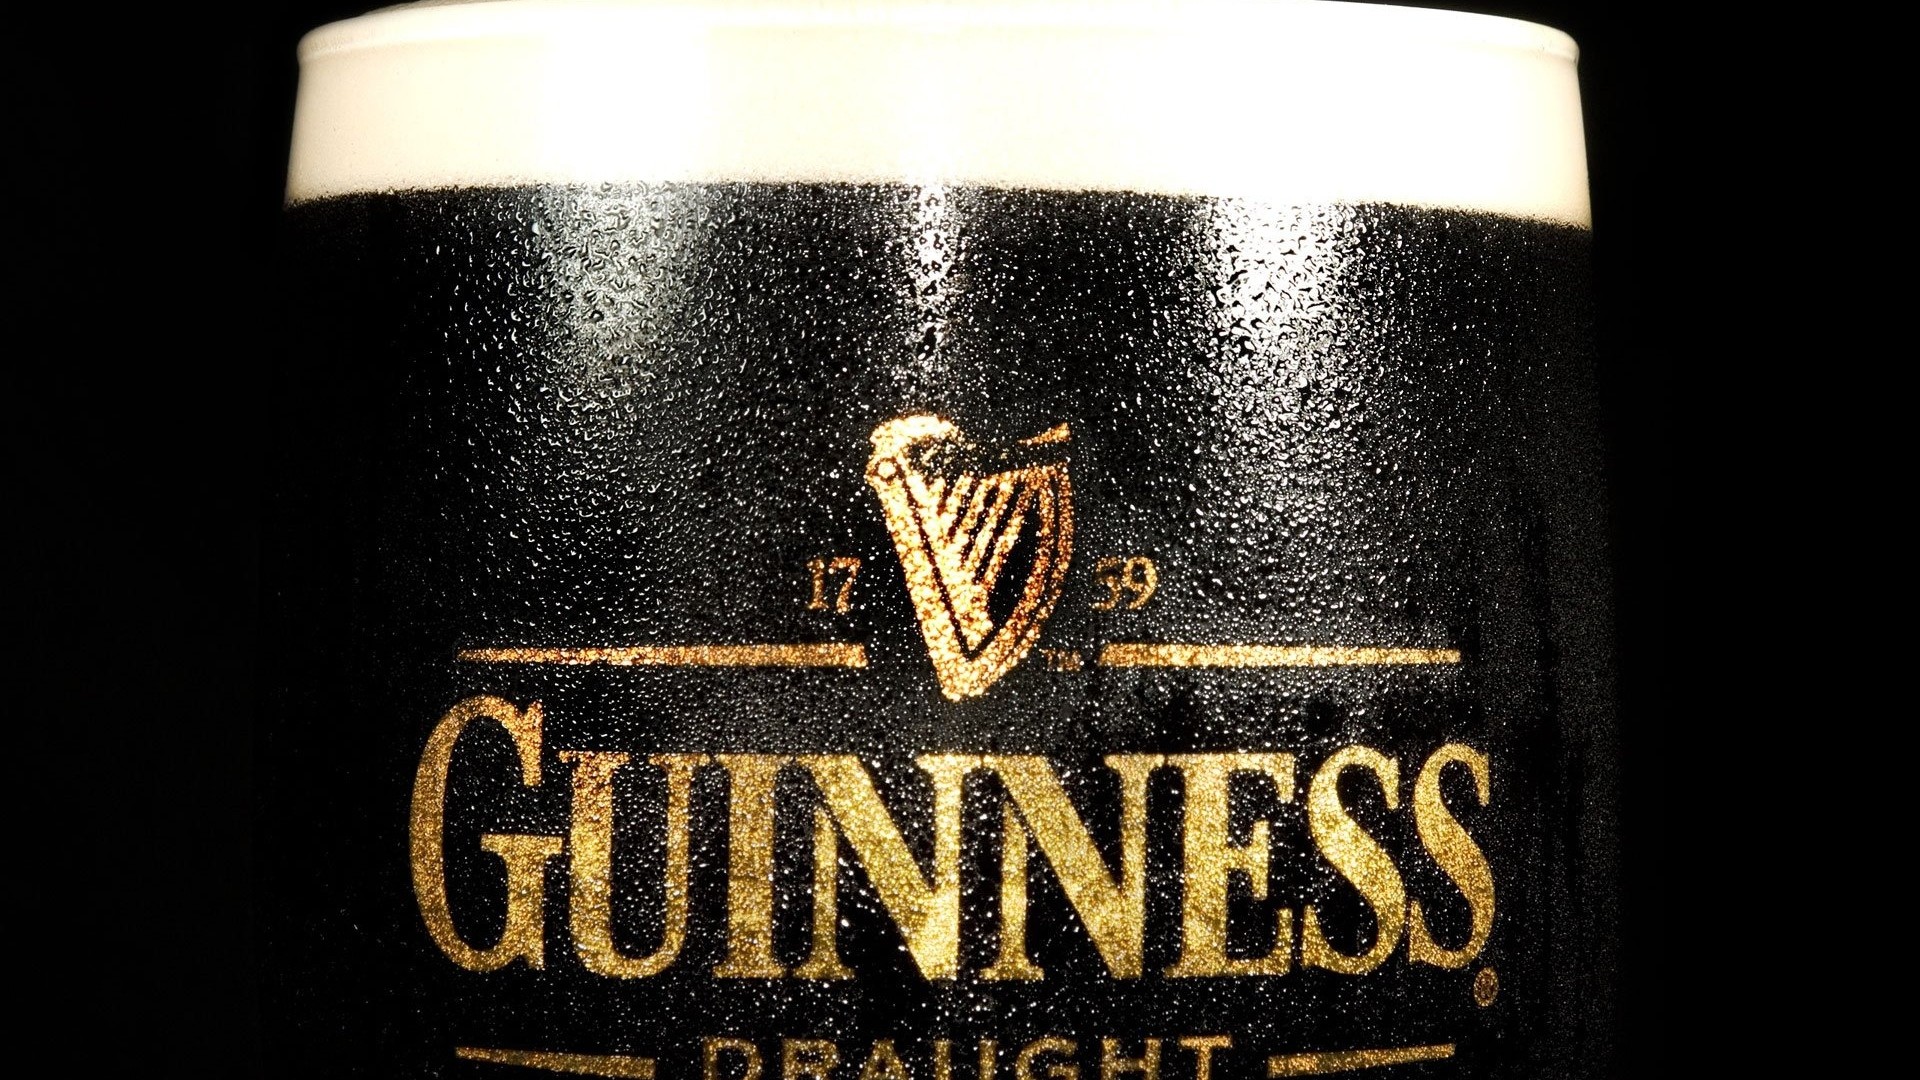 2560x1600, Products - Guinness Wallpaper Hd , HD Wallpaper & Backgrounds